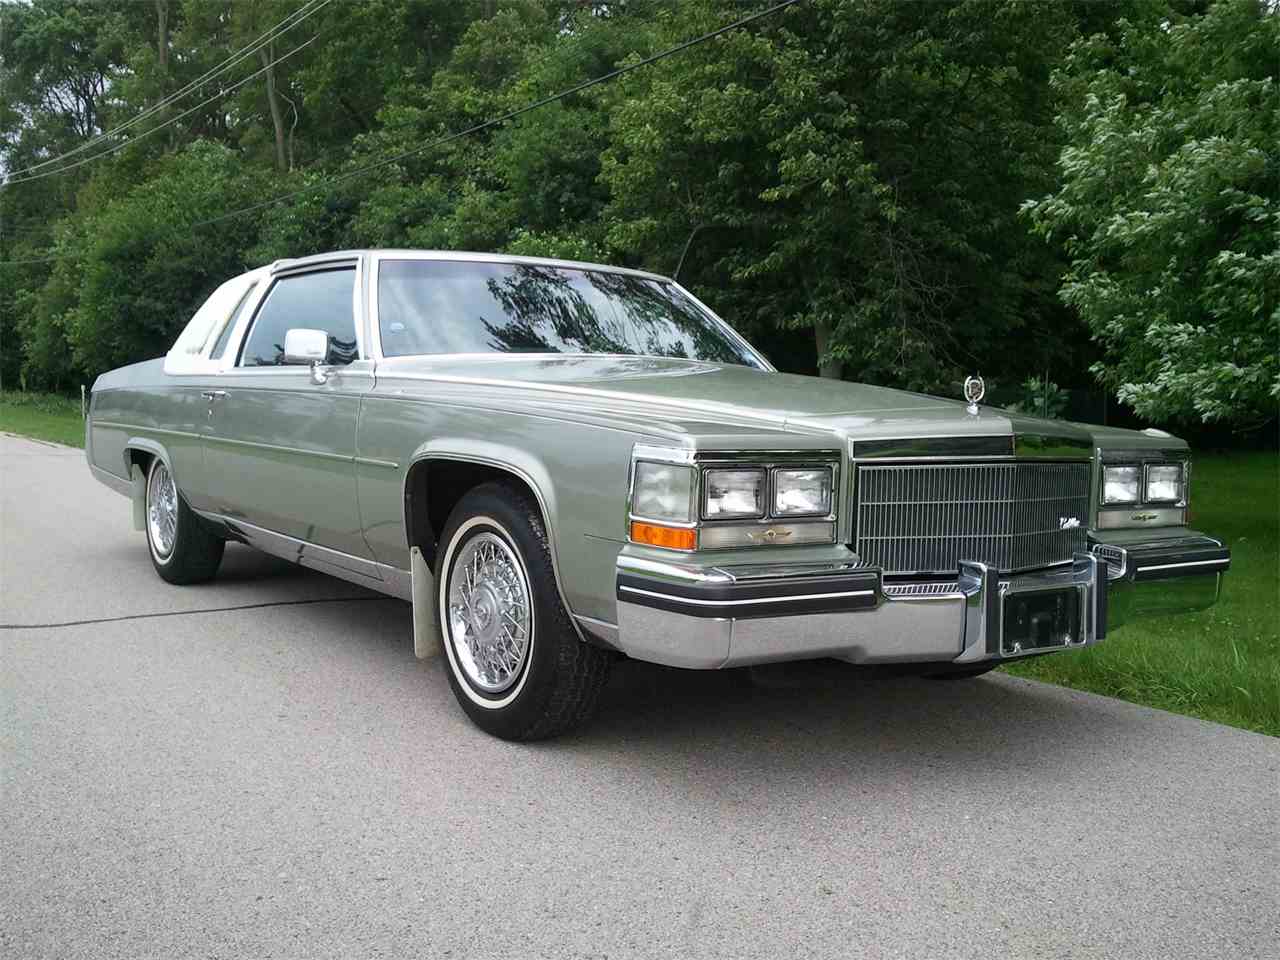 1985 Cadillac Fleetwood Brougham for Sale | ClassicCars ...